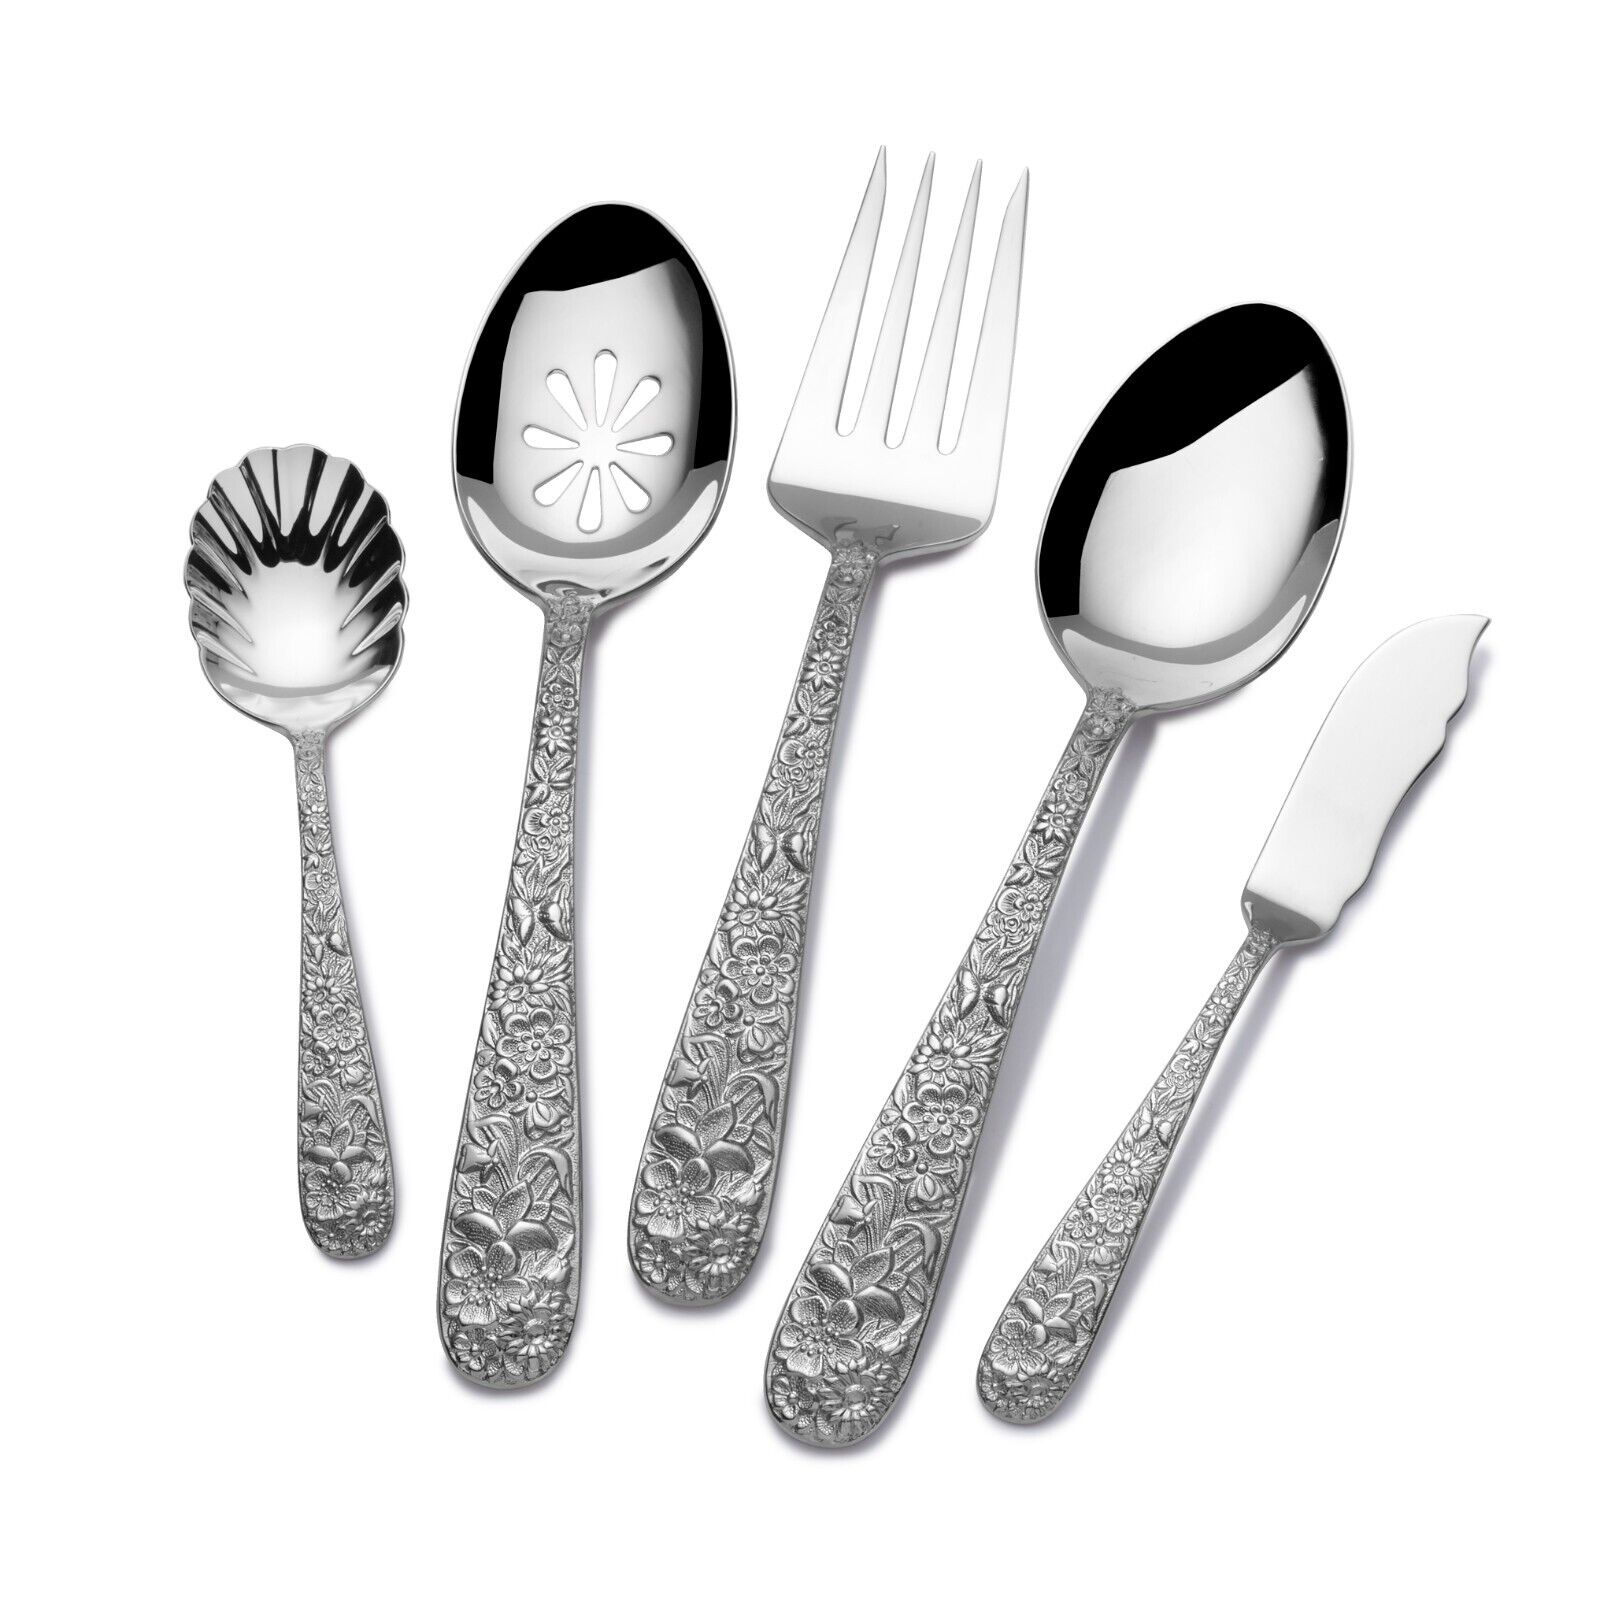 Contessina by Towle stainless flatware 5 piece Hostess Set, factory NEW